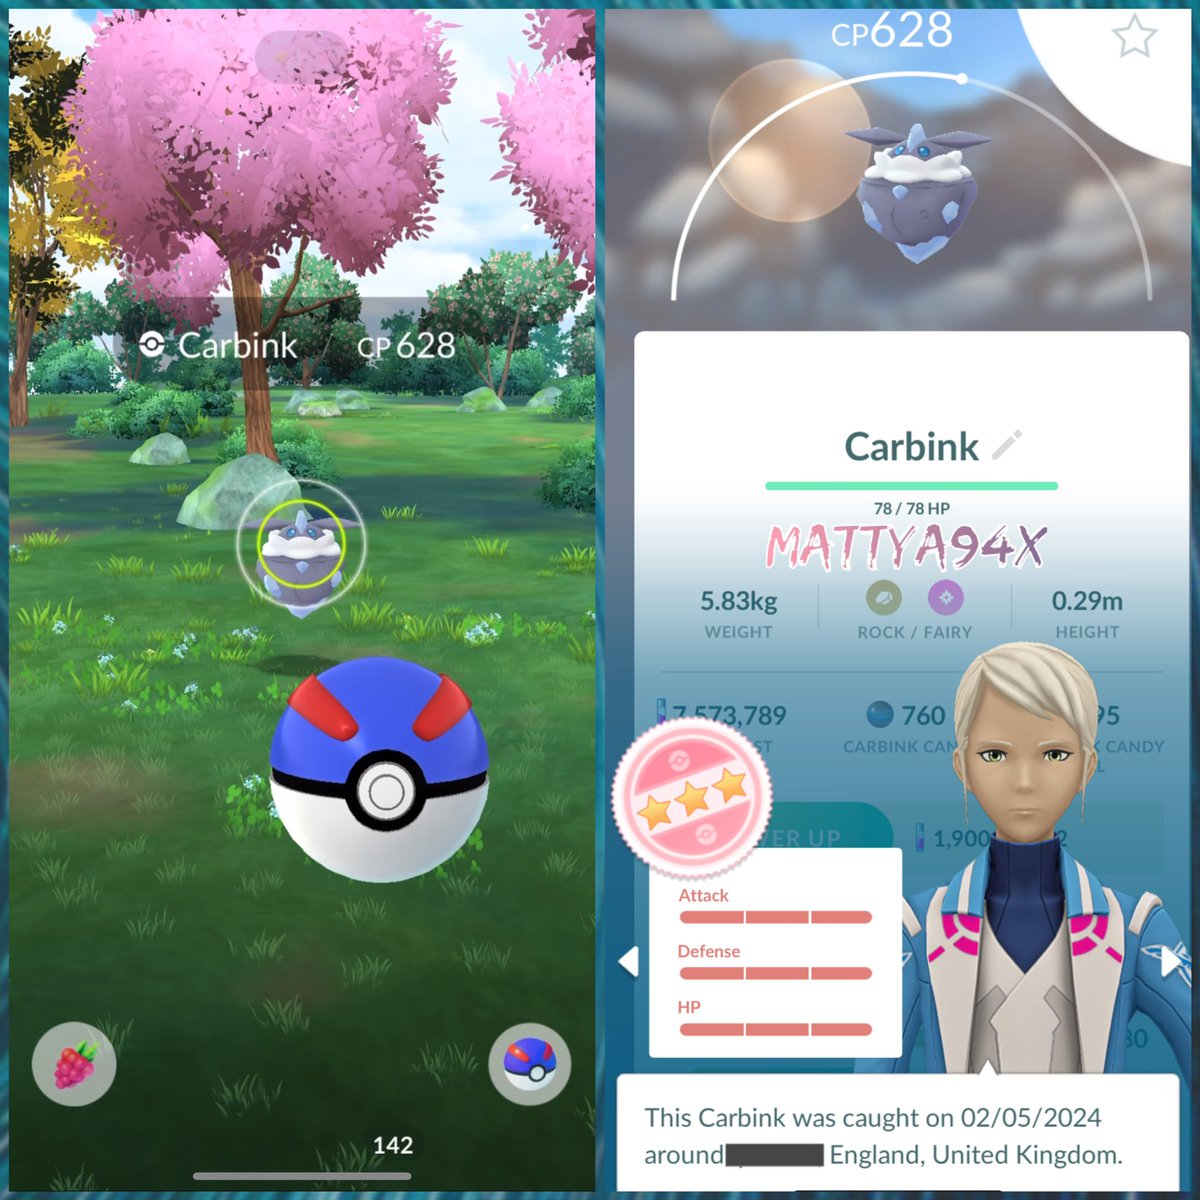 Manage to get lucky yesterday from the research tasks haven’t done many but got My 1st HUNDO 100% CARBINK Let’s Go! 🎉💯🥳💯🎉

#PokemonGO #Hundo #GlitzAndGlam